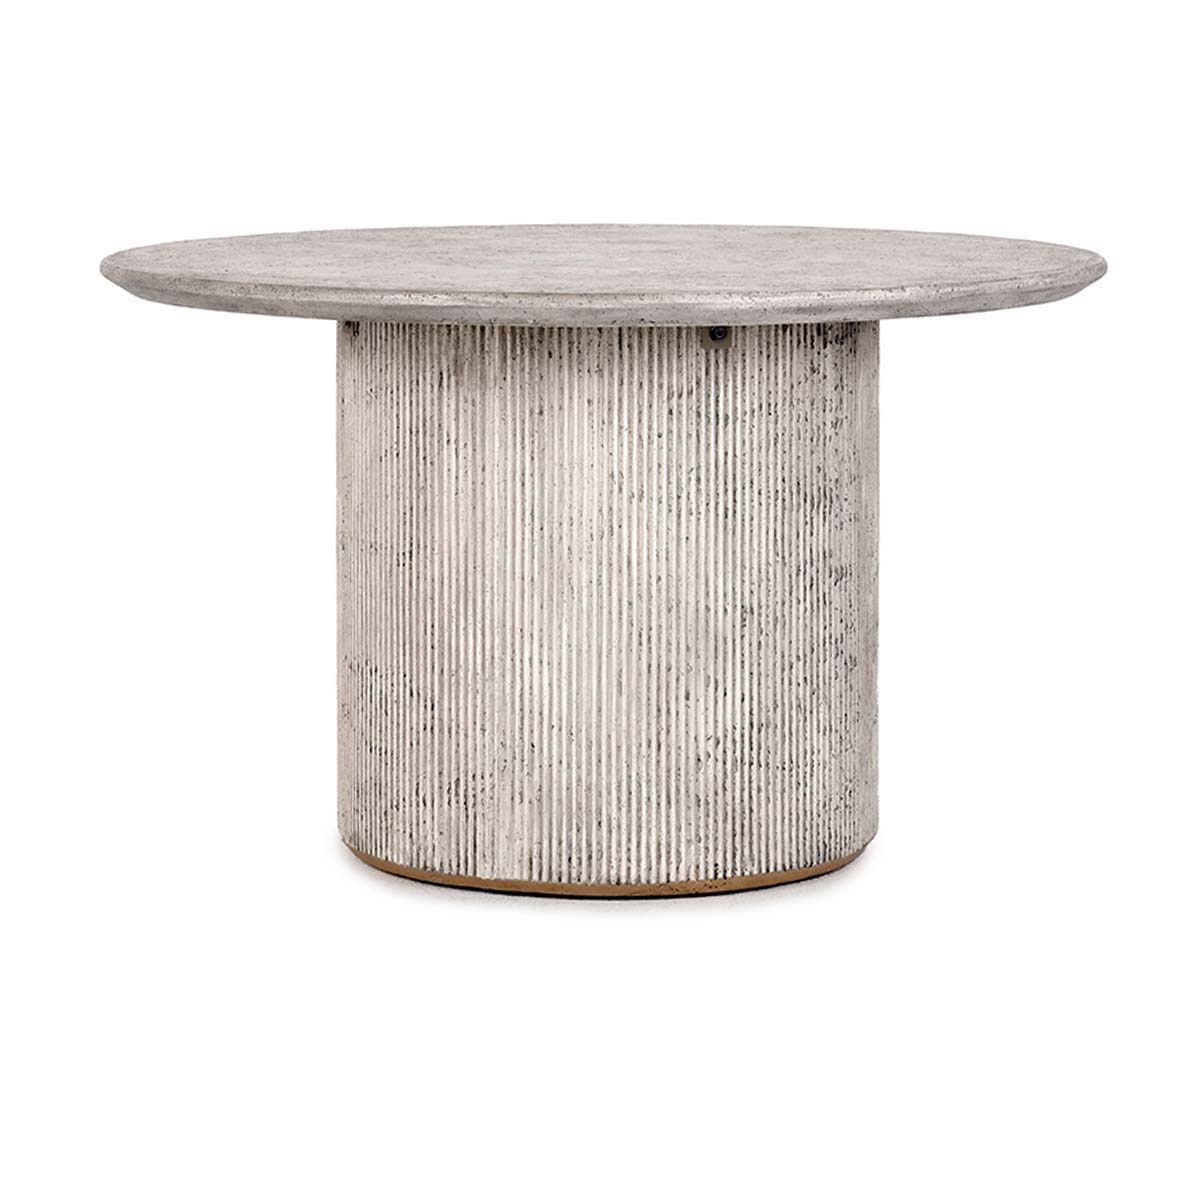 Debbie - Outdoor Round Dining Table - Light Gray